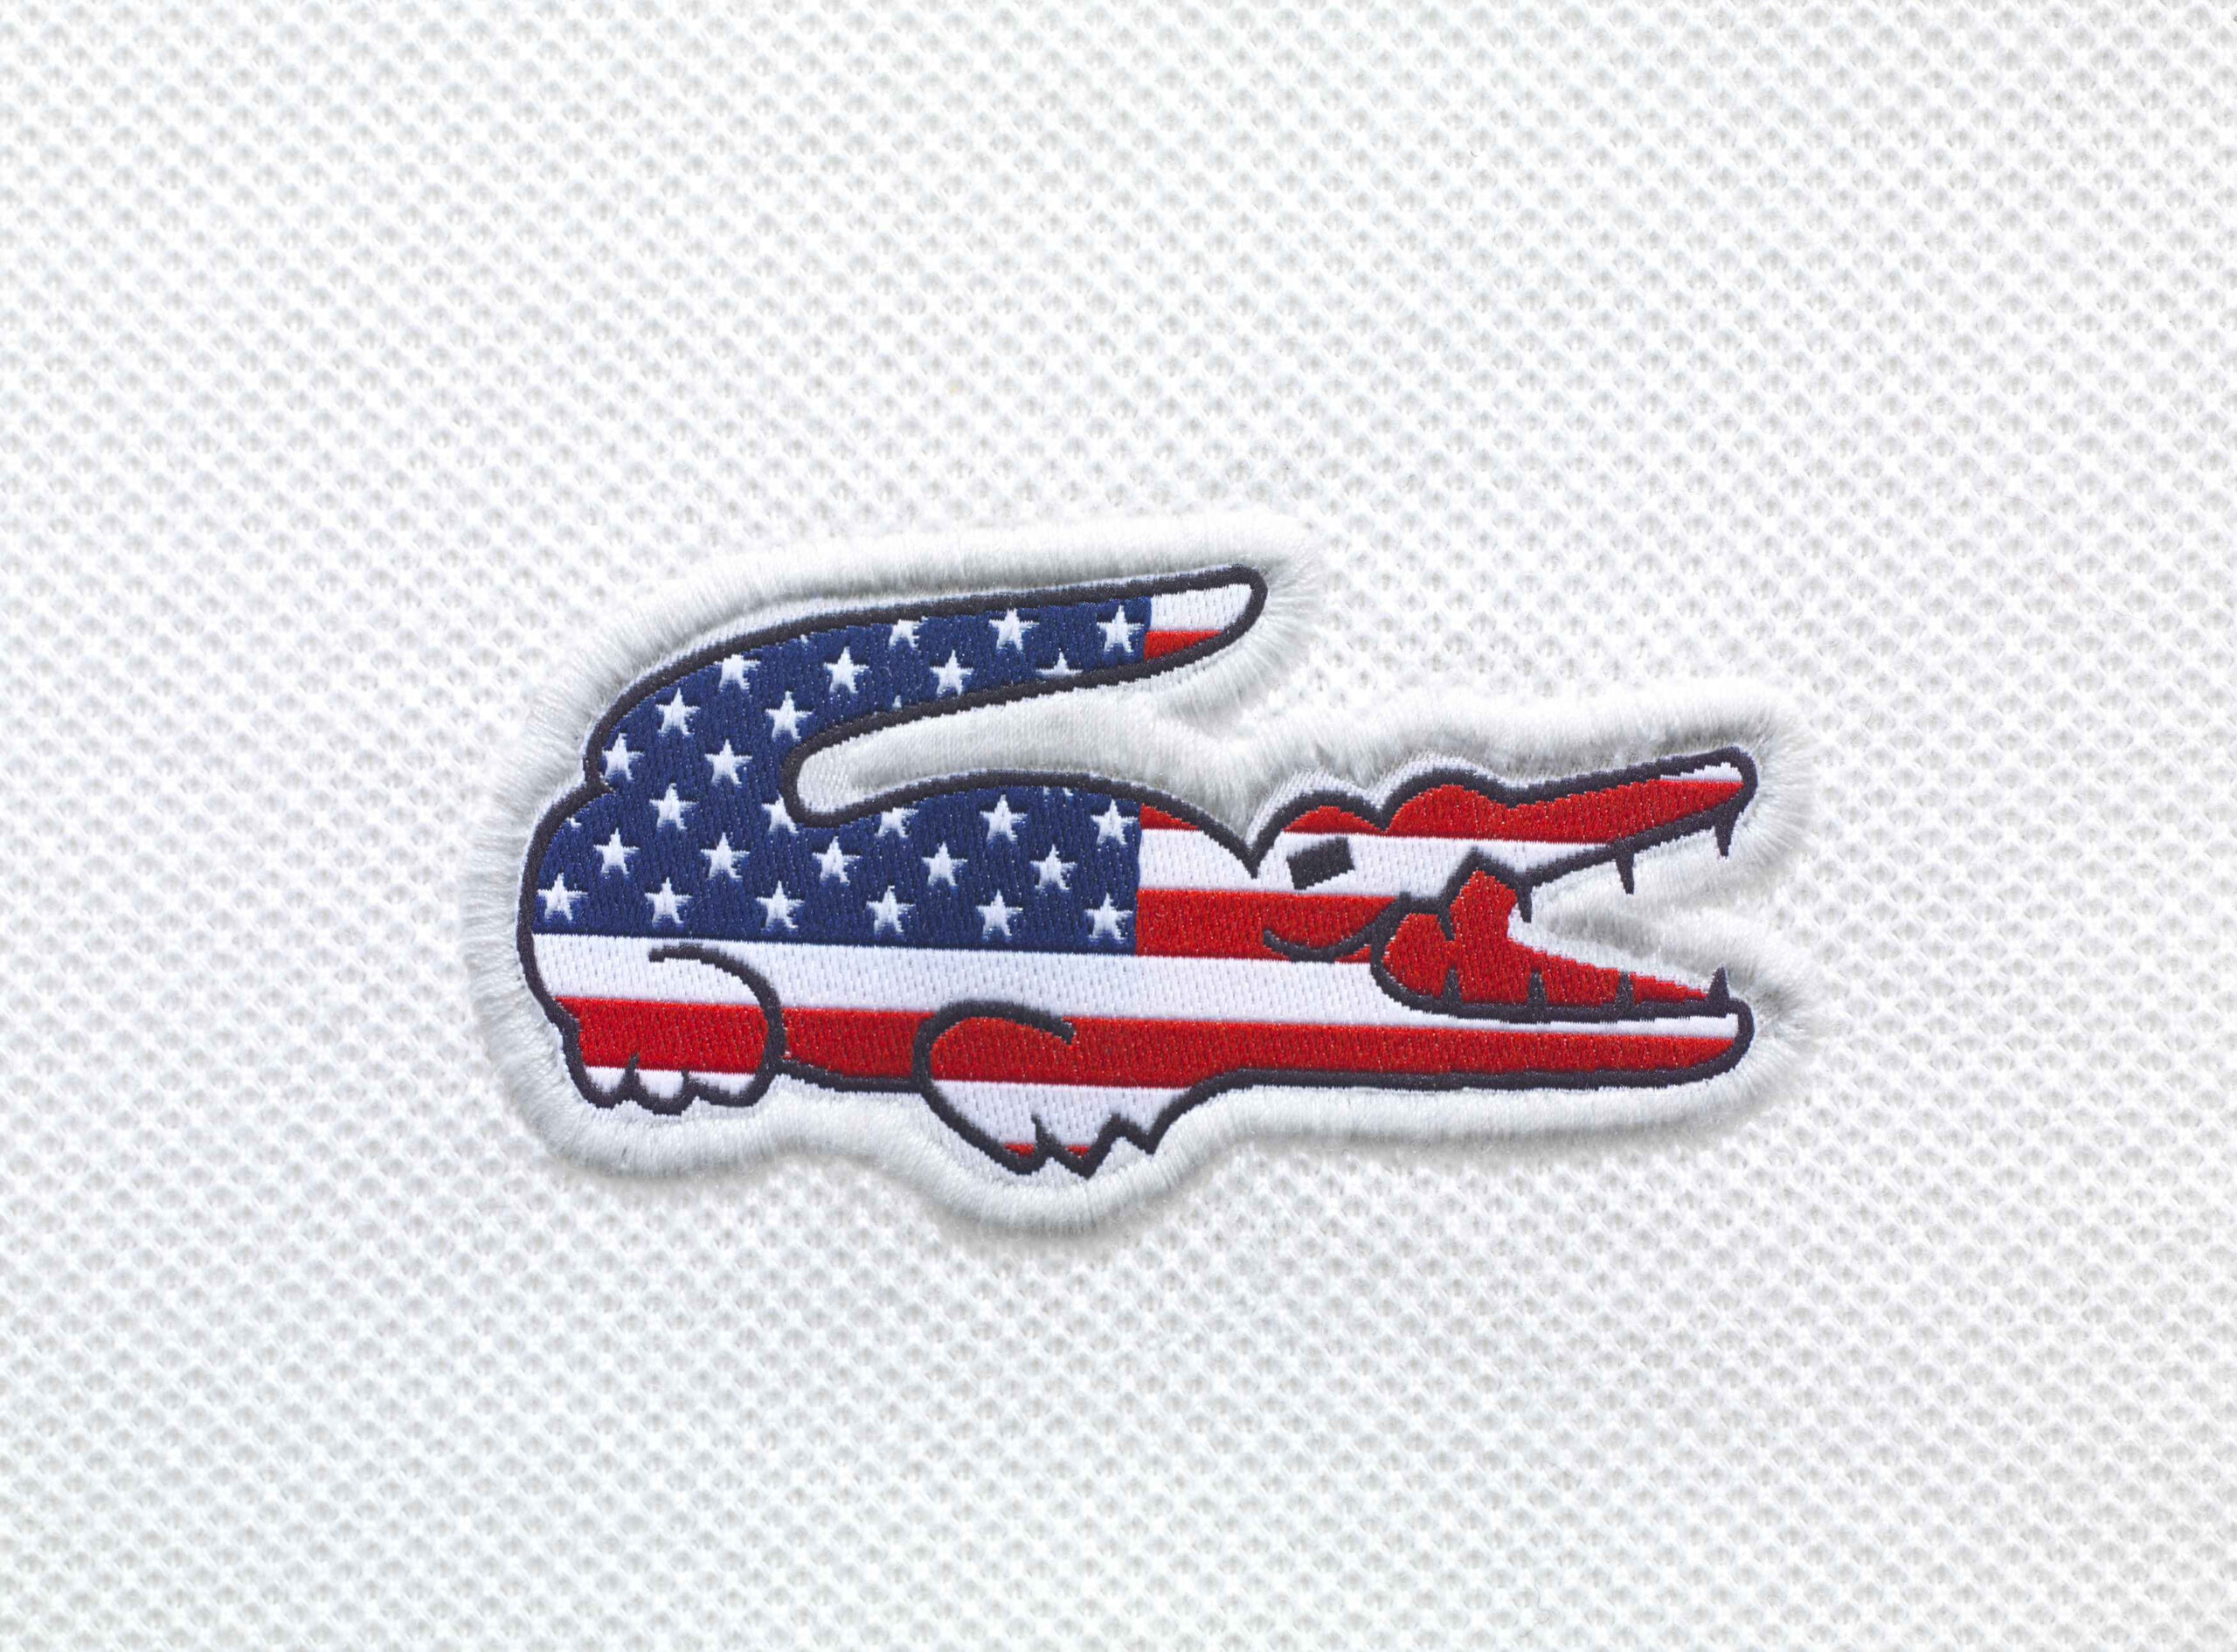 Wallpaper Lacoste, Us, Flag 3500x2586px 2k Free, Lacoste Wallpaper, Other